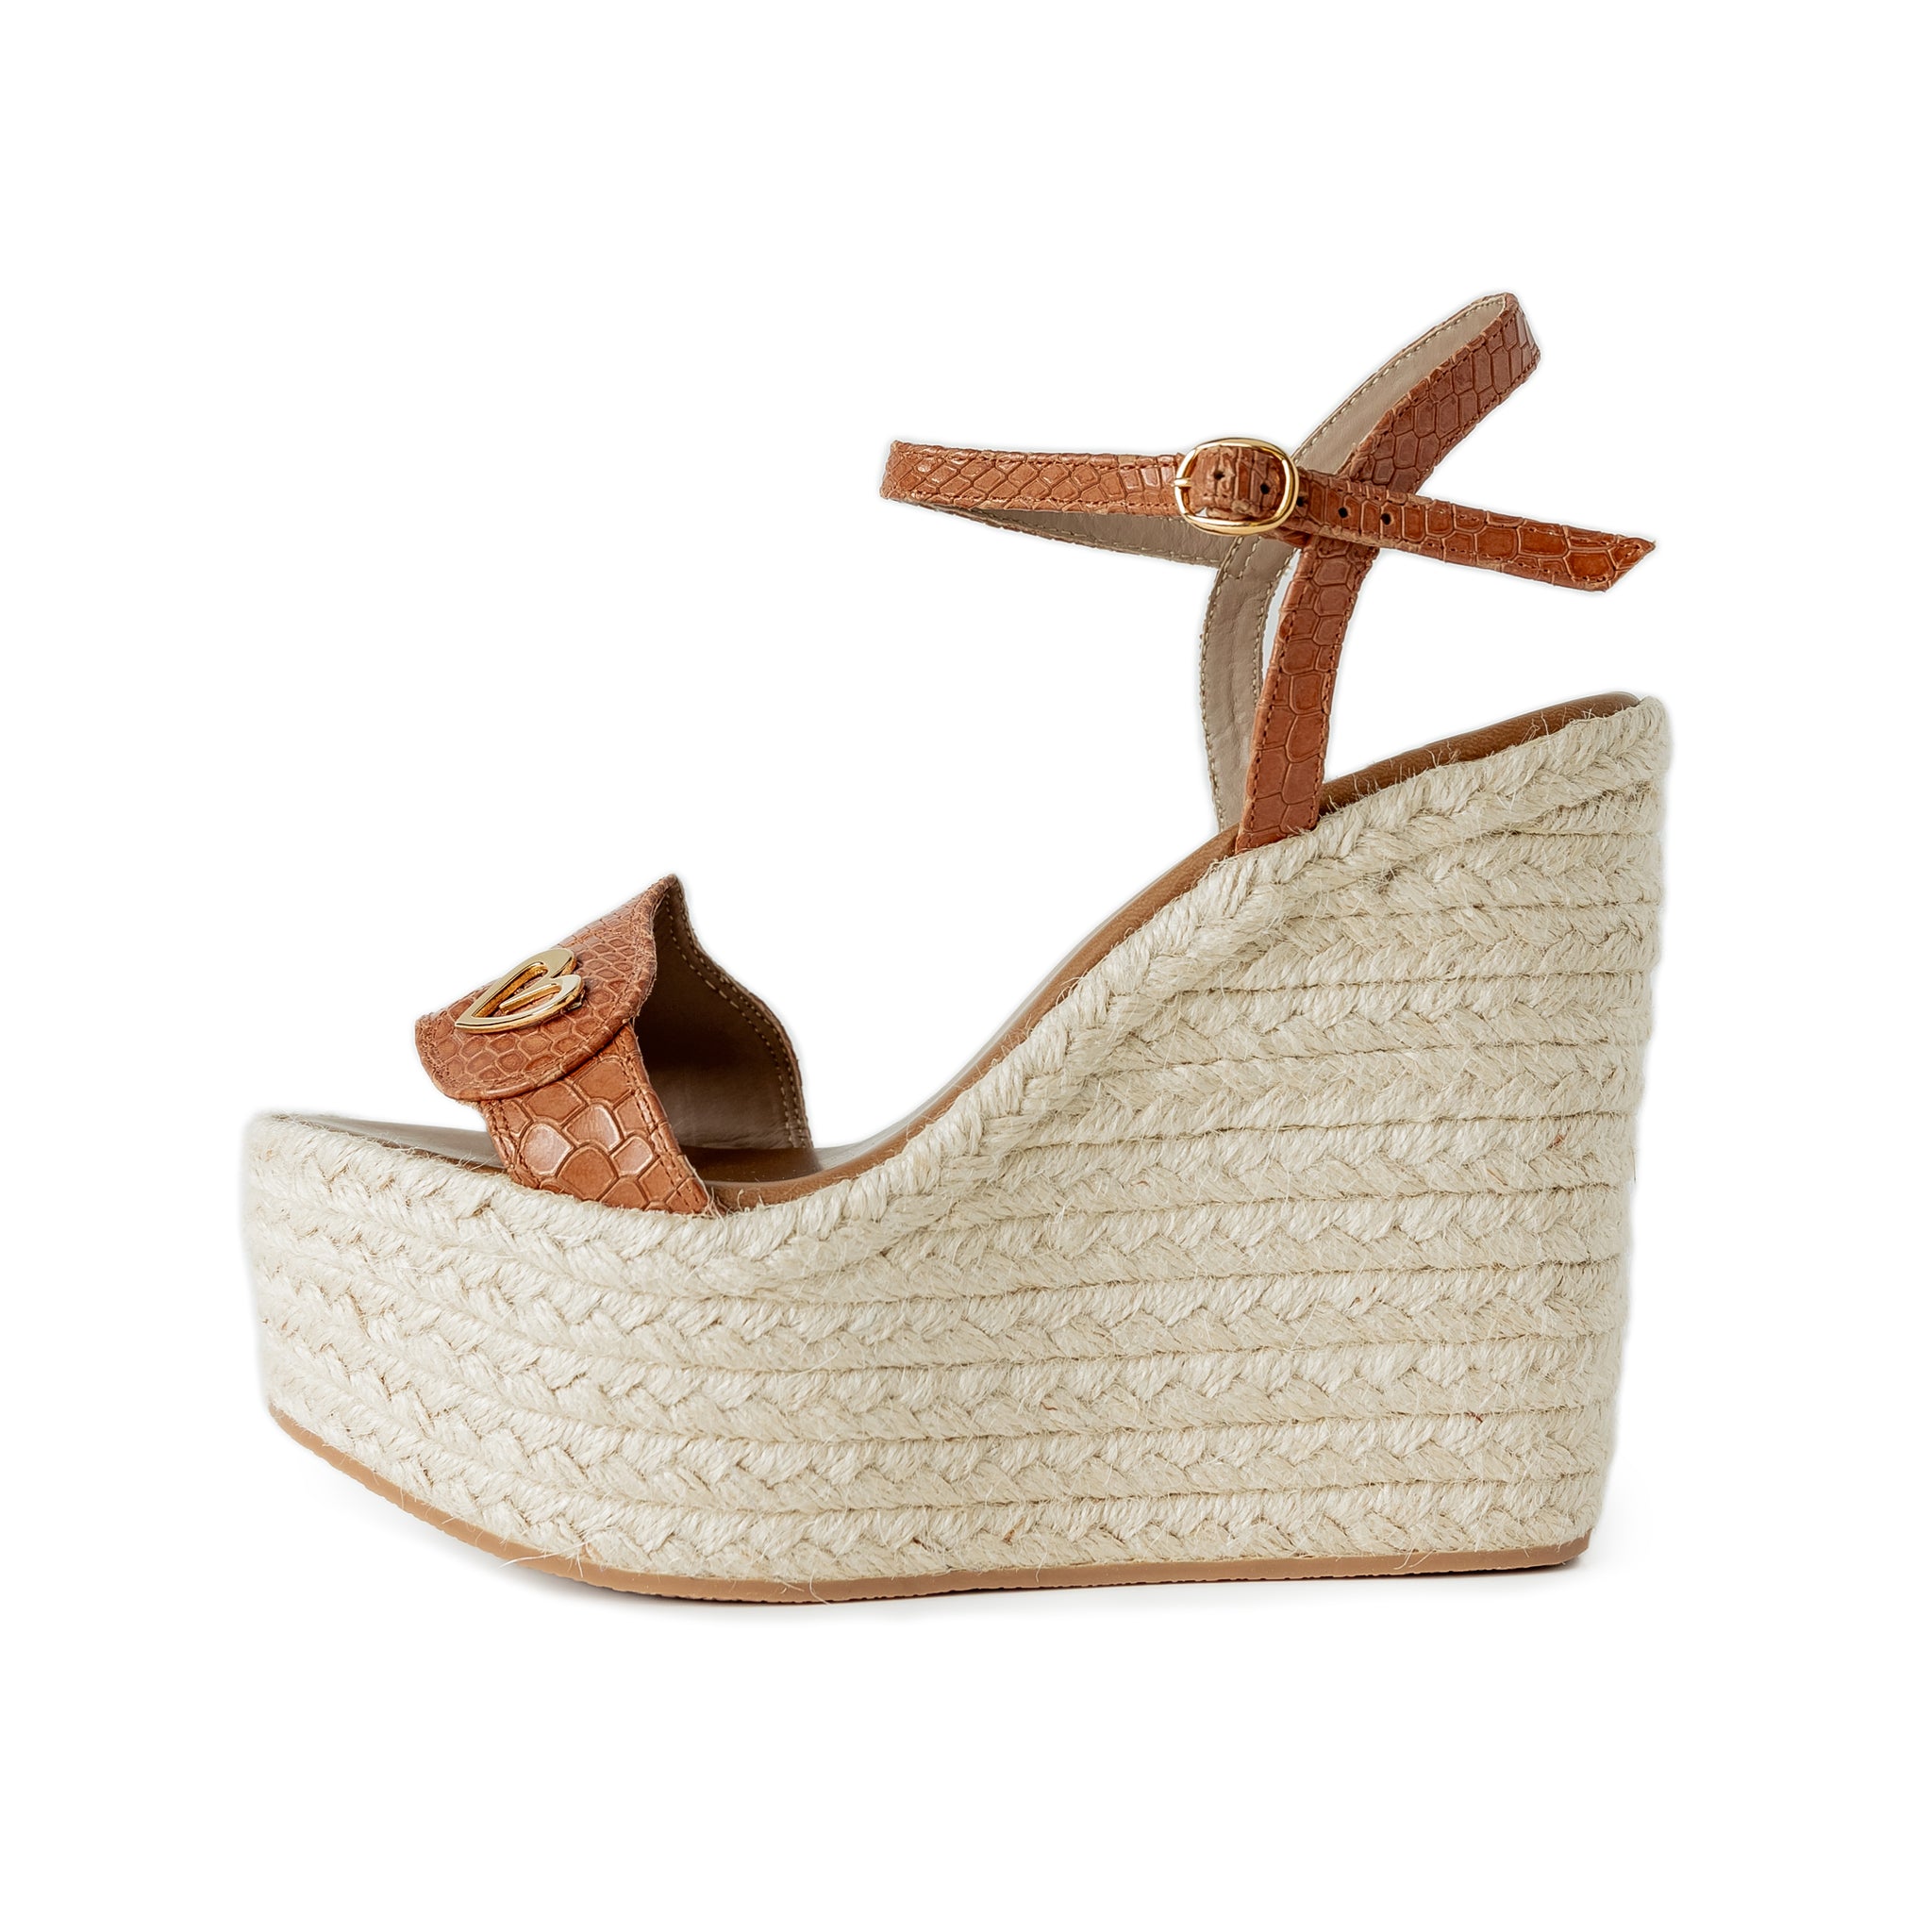 Amy Espadrilles Camel by Nataly Mendez. Genuine leather upper material Genuine leather insole lining Flexible rubber sole Handmade 5.5 inch high heel 2.5 inch platform